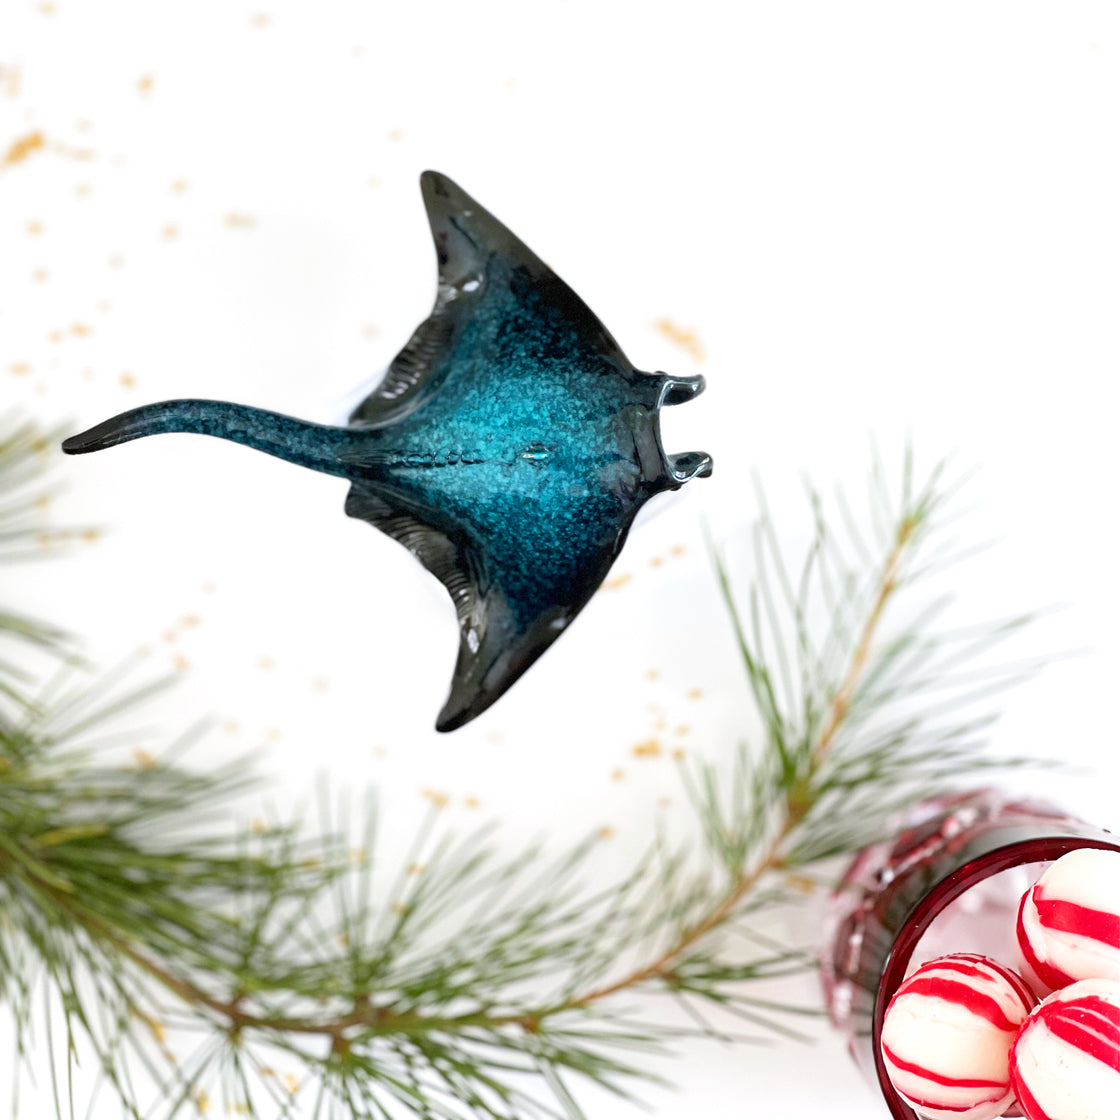 A bird's-eye perspective of the rengora manta ray Christmas ornament accompanied by pine tree leaves and a container of Christmas candies